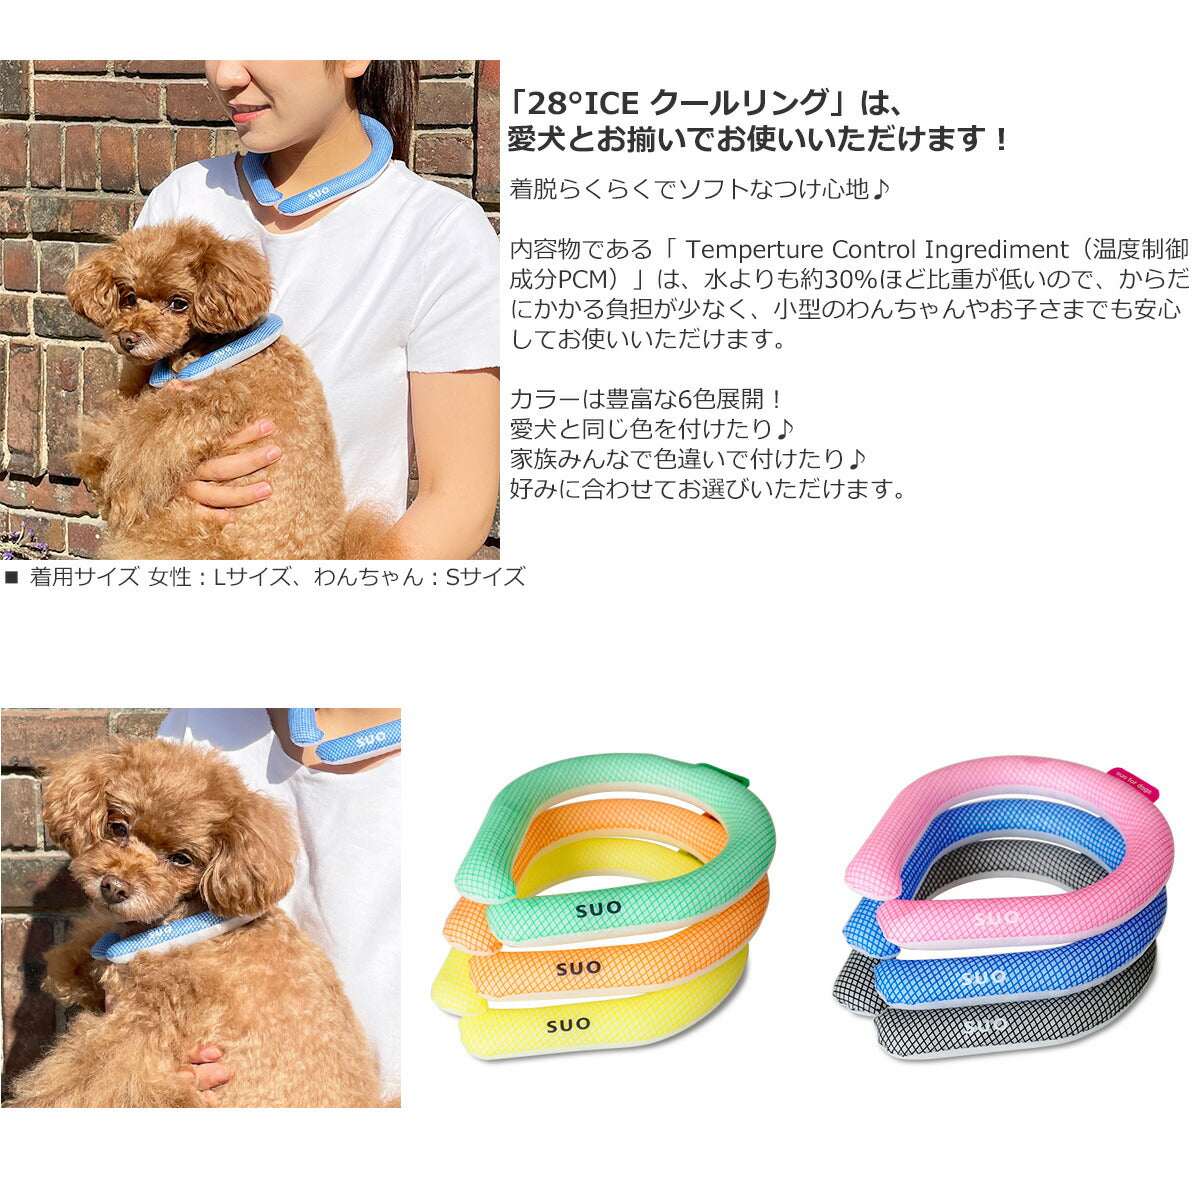 SUO for dogs 28°ICE SUOリング ボタンなし SS ブラック 熱中症対策グッズ 暑さ対策 ひんやり 首 冷感 犬 大人 子供